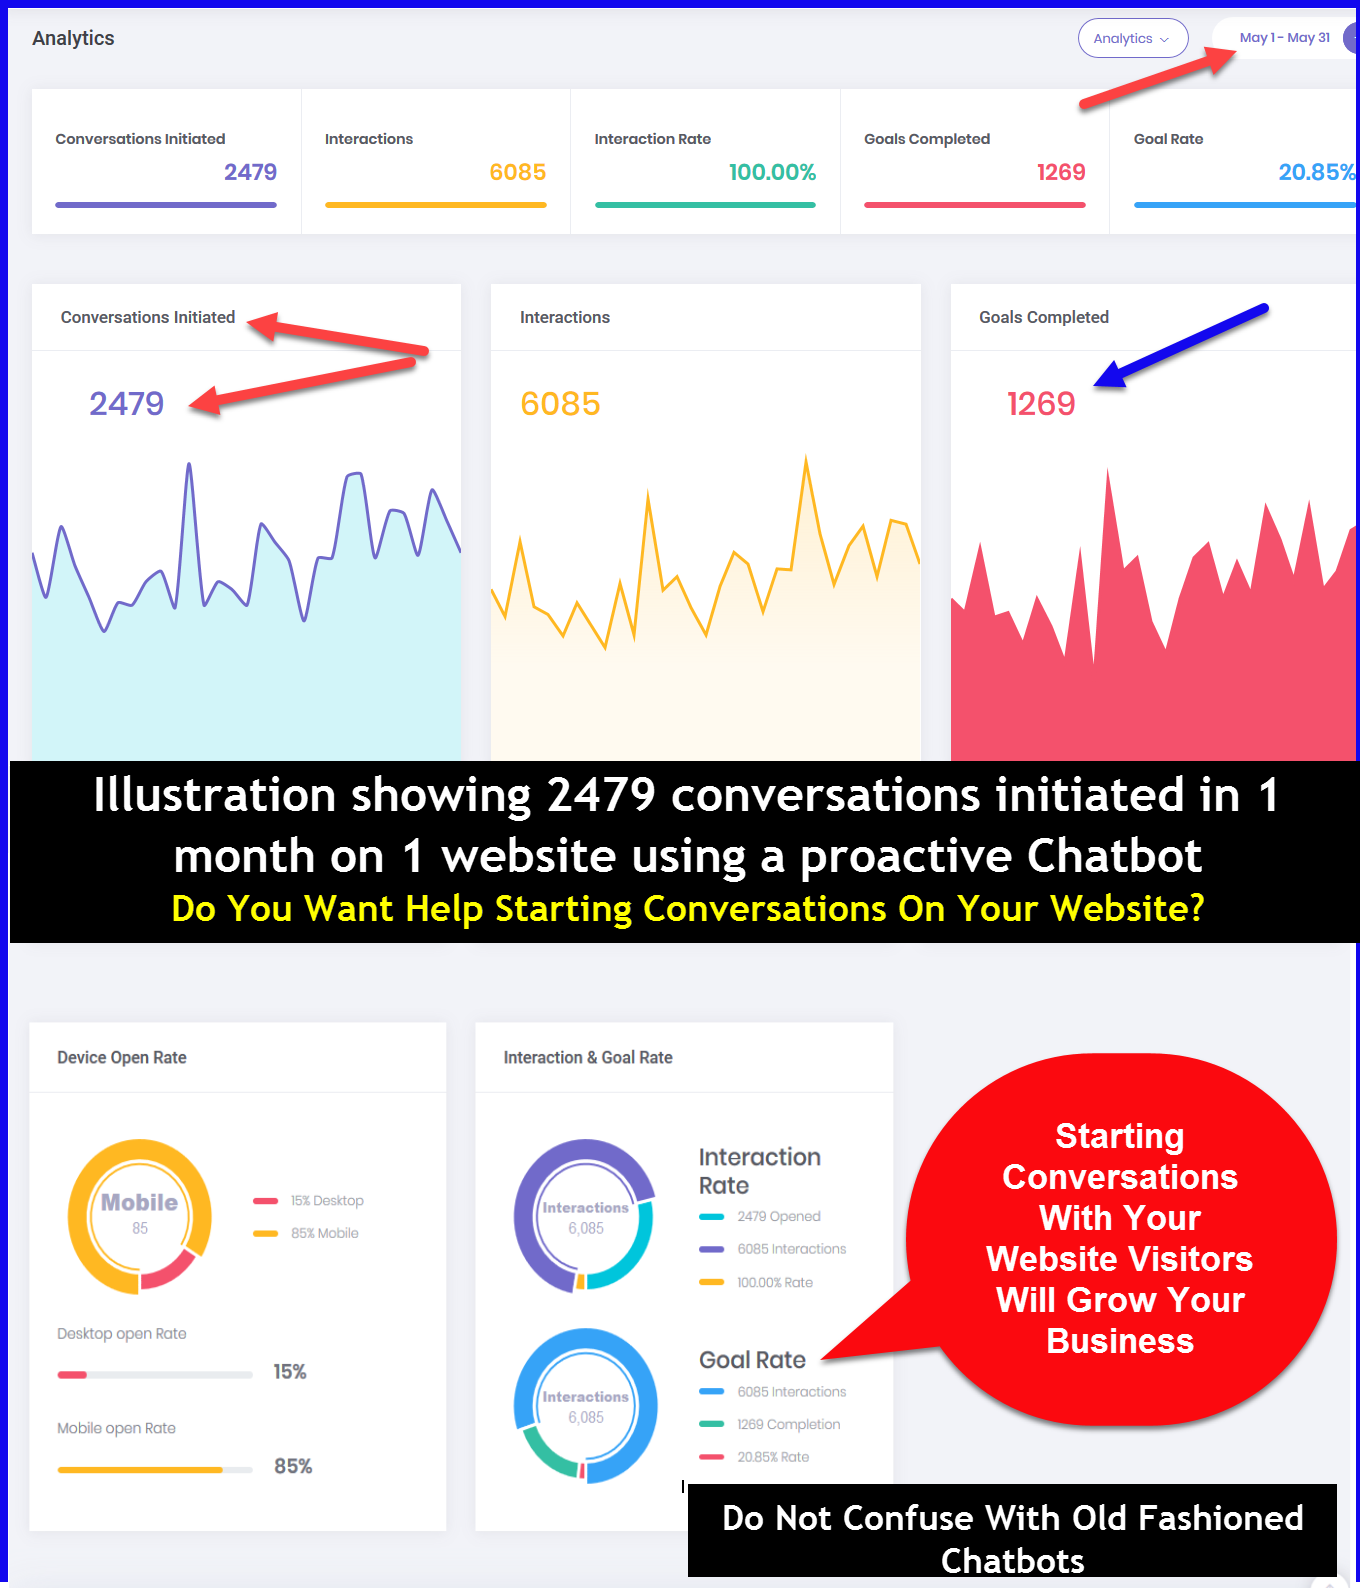 Starting conversations with your website visitors will grow your business